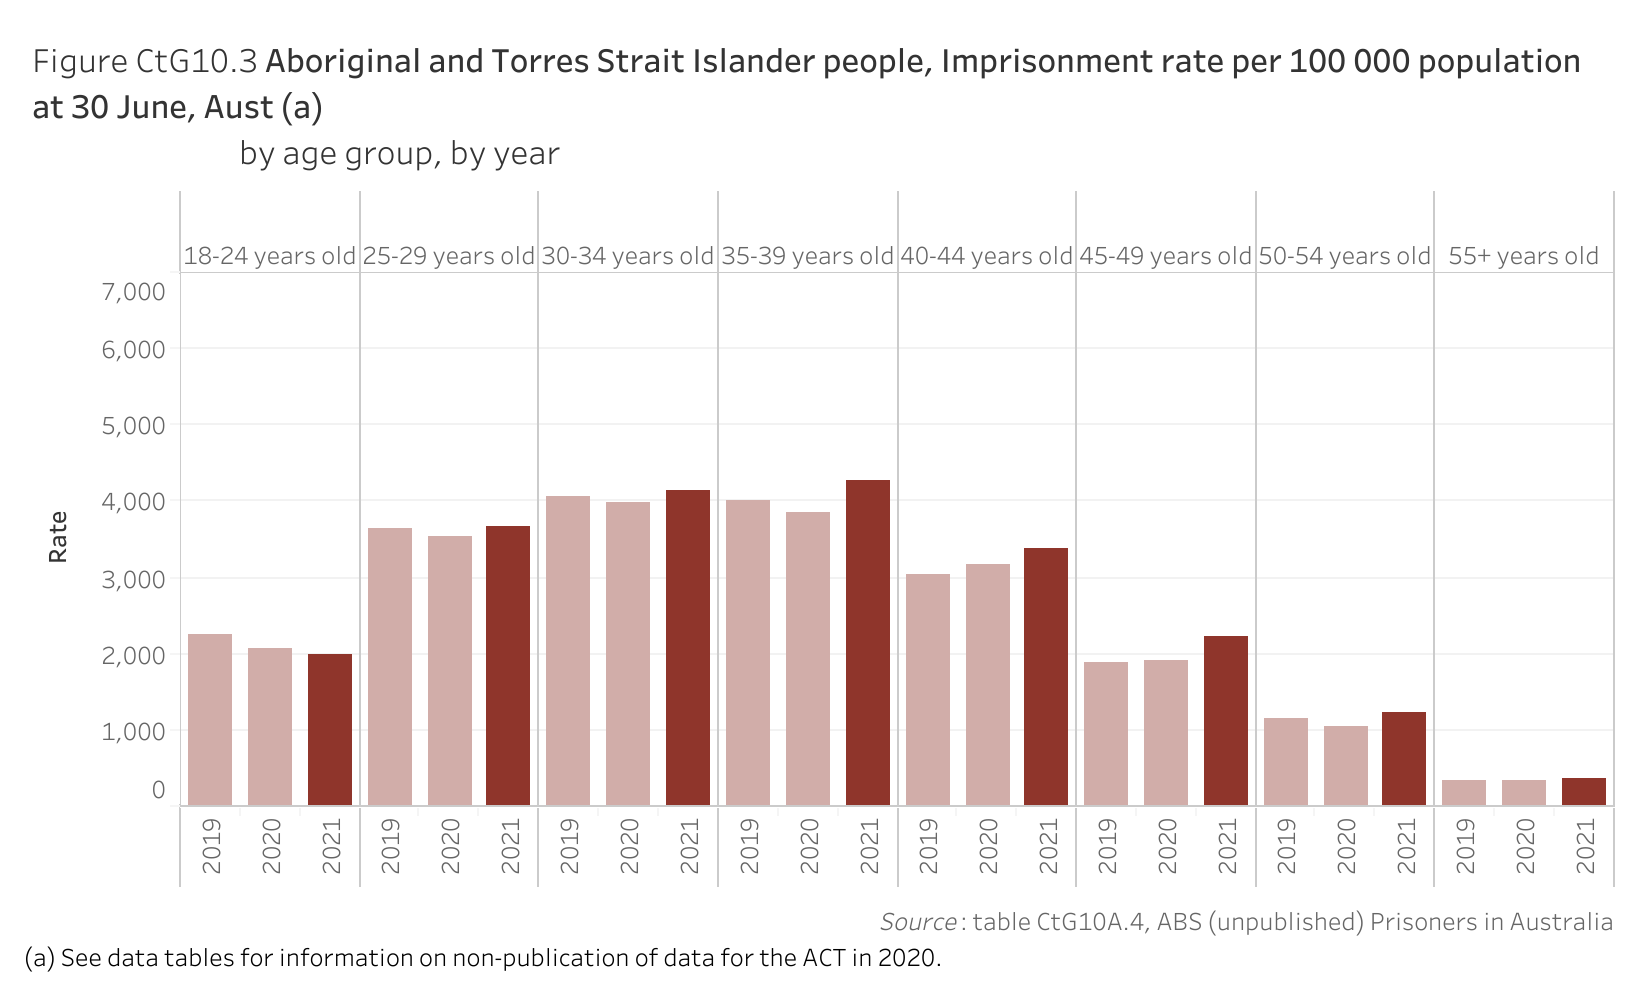 Figure CtG10.3. Bar chart showing the imprisonment rate of Aboriginal and Torres Strait Islander people per 100 000 population at 30 June in Australia, by age group and by year. Data table of figure CtG10.3 is below.